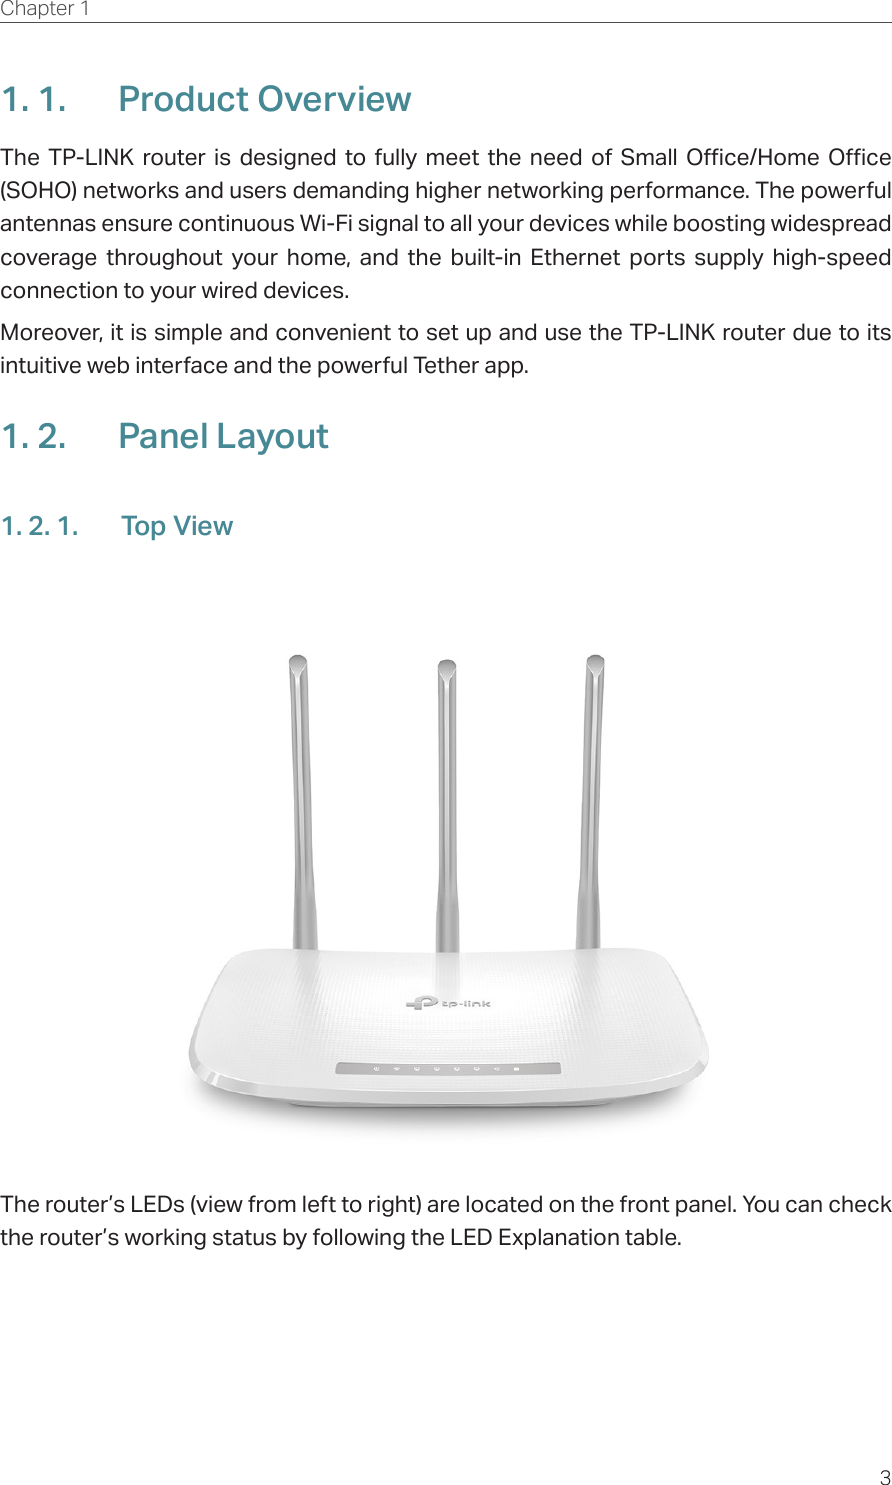 3Chapter 1  1. 1.  Product OverviewThe TP-LINK router is designed to fully meet the need of Small Office/Home Office (SOHO) networks and users demanding higher networking performance. The powerful antennas ensure continuous Wi-Fi signal to all your devices while boosting widespread coverage throughout your home, and the built-in Ethernet ports supply high-speed connection to your wired devices.Moreover, it is simple and convenient to set up and use the TP-LINK router due to its intuitive web interface and the powerful Tether app.1. 2.  Panel Layout1. 2. 1.  Top ViewThe router’s LEDs (view from left to right) are located on the front panel. You can check the router’s working status by following the LED Explanation table.